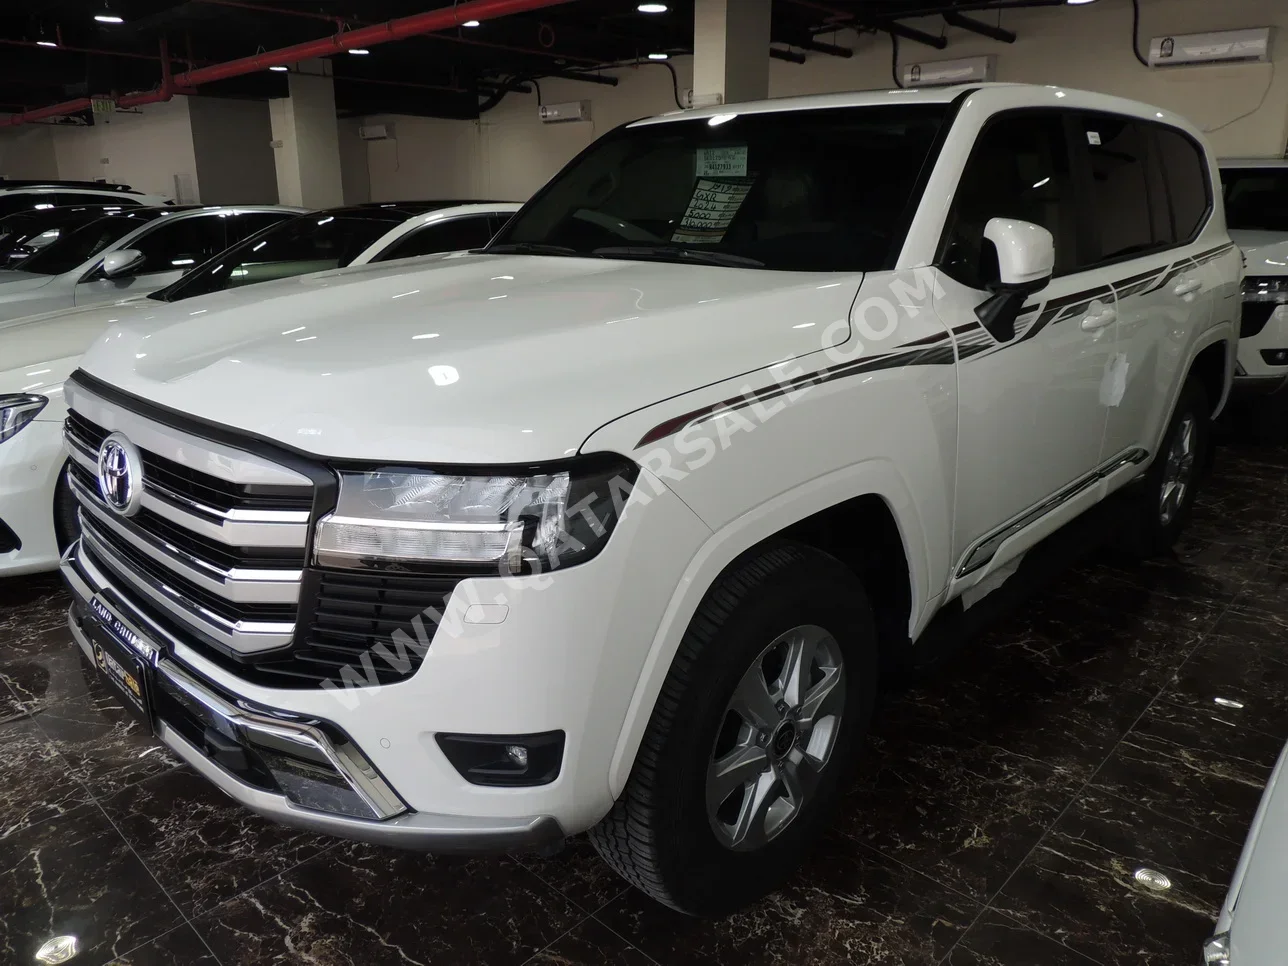 Toyota  Land Cruiser  GXR  2024  Automatic  5,000 Km  6 Cylinder  Four Wheel Drive (4WD)  SUV  White  With Warranty